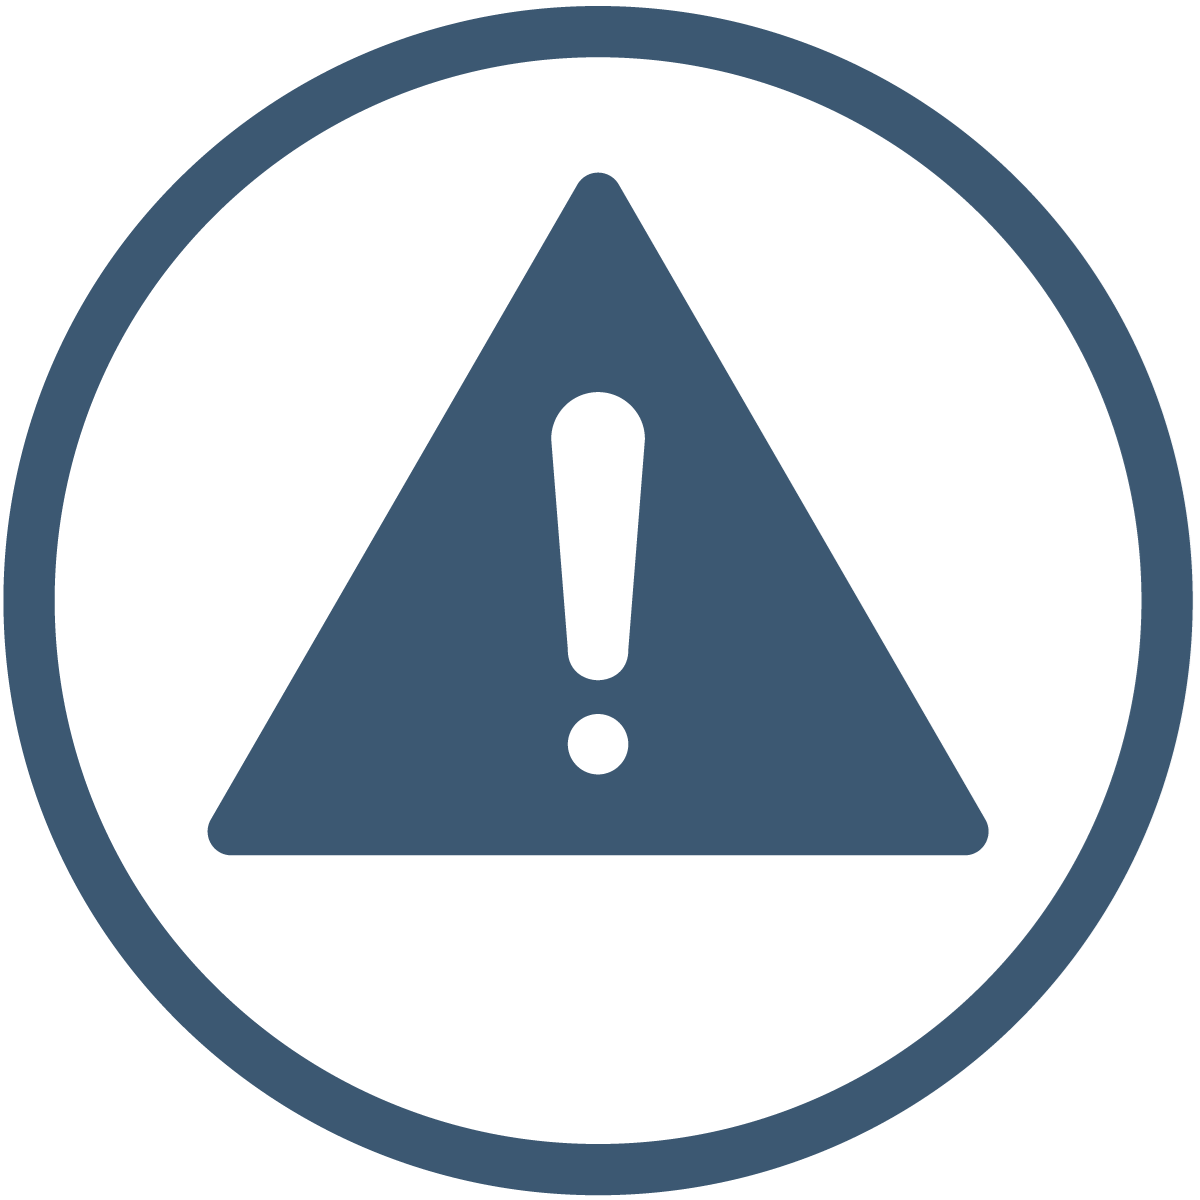 Warning symbol of a triangle with an exclamation point in the middle inside a circle.